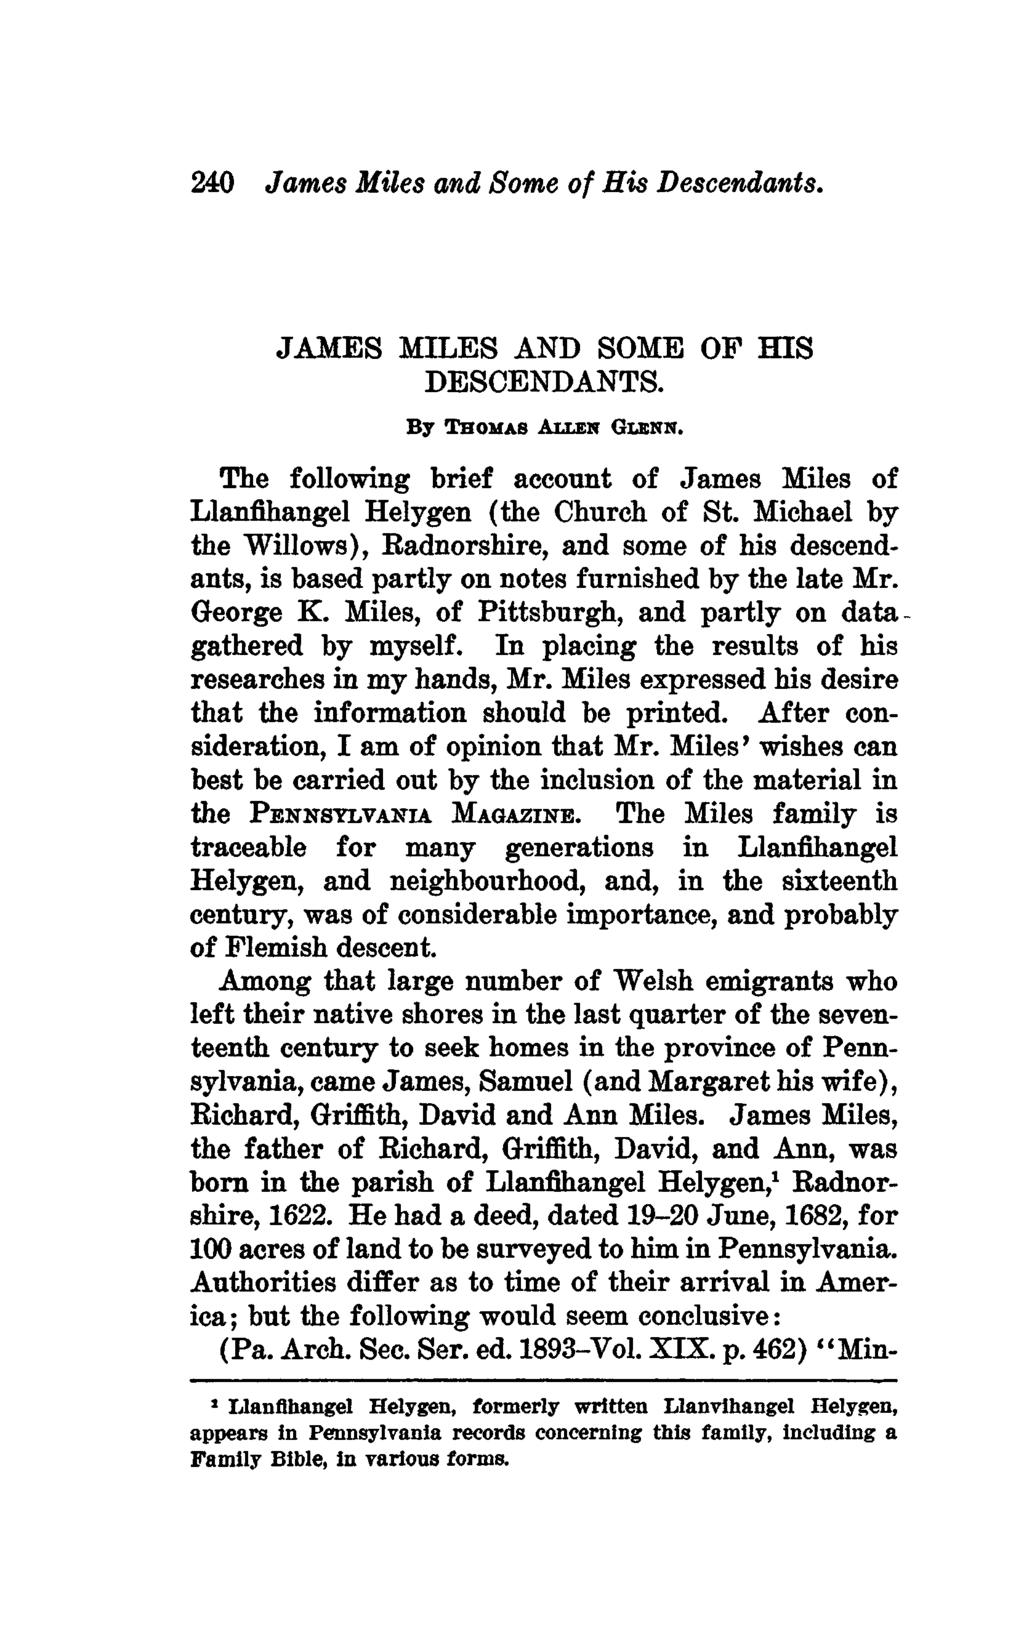 240 James Miles and Some of His Descendants. JAMES MILES AND SOME OF HIS DESCENDANTS. By THOMAS ALLEN GLENN. The following brief account of James Miles of Llanfihangel Helygen (the Church of St.